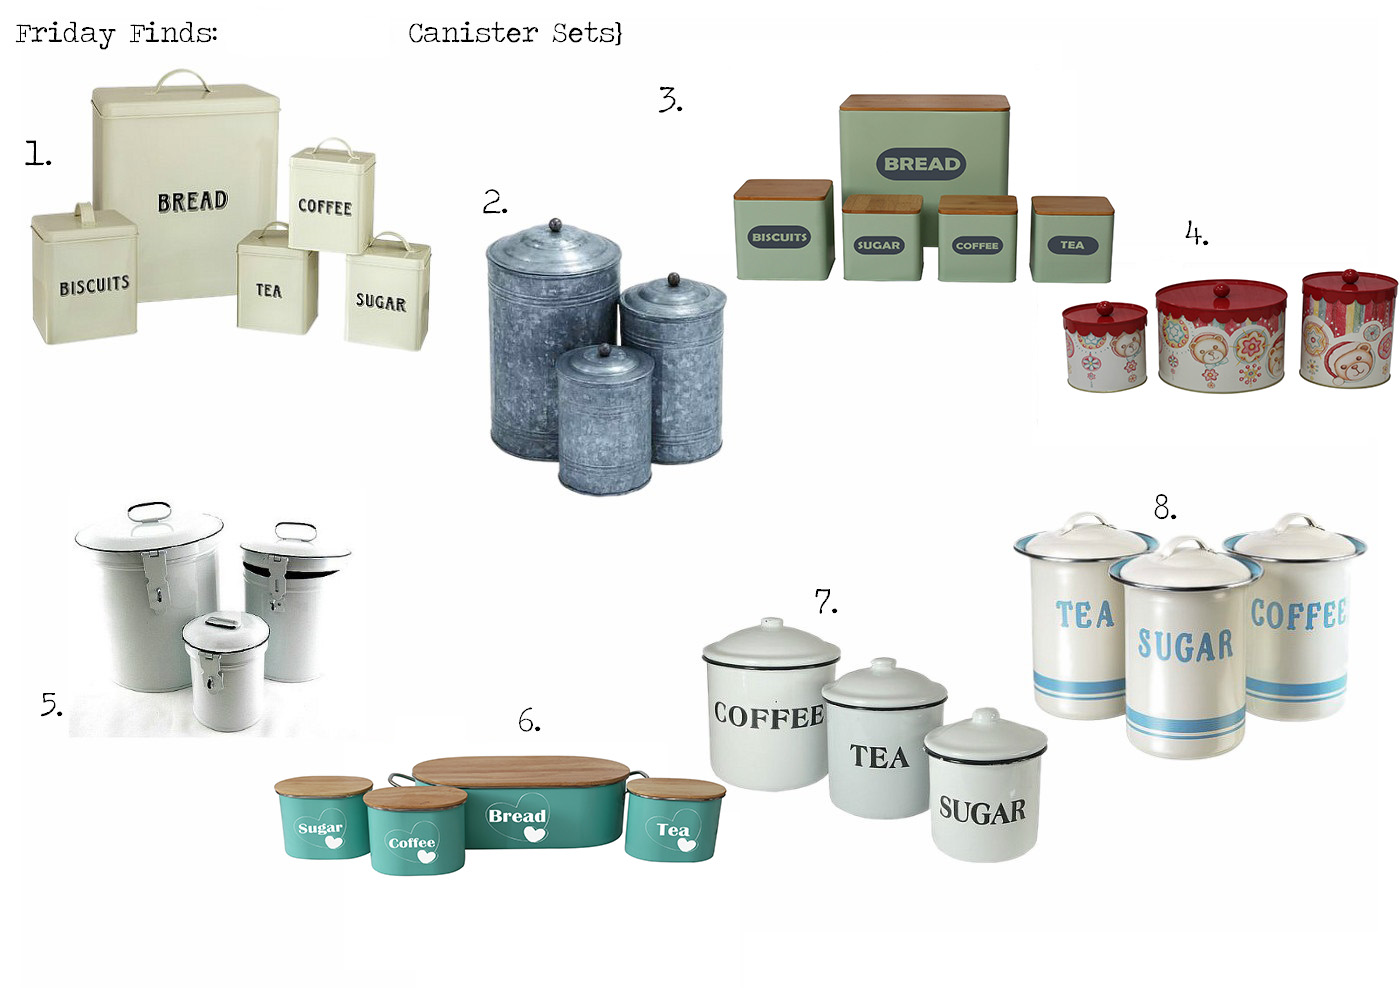 canisters.jpg